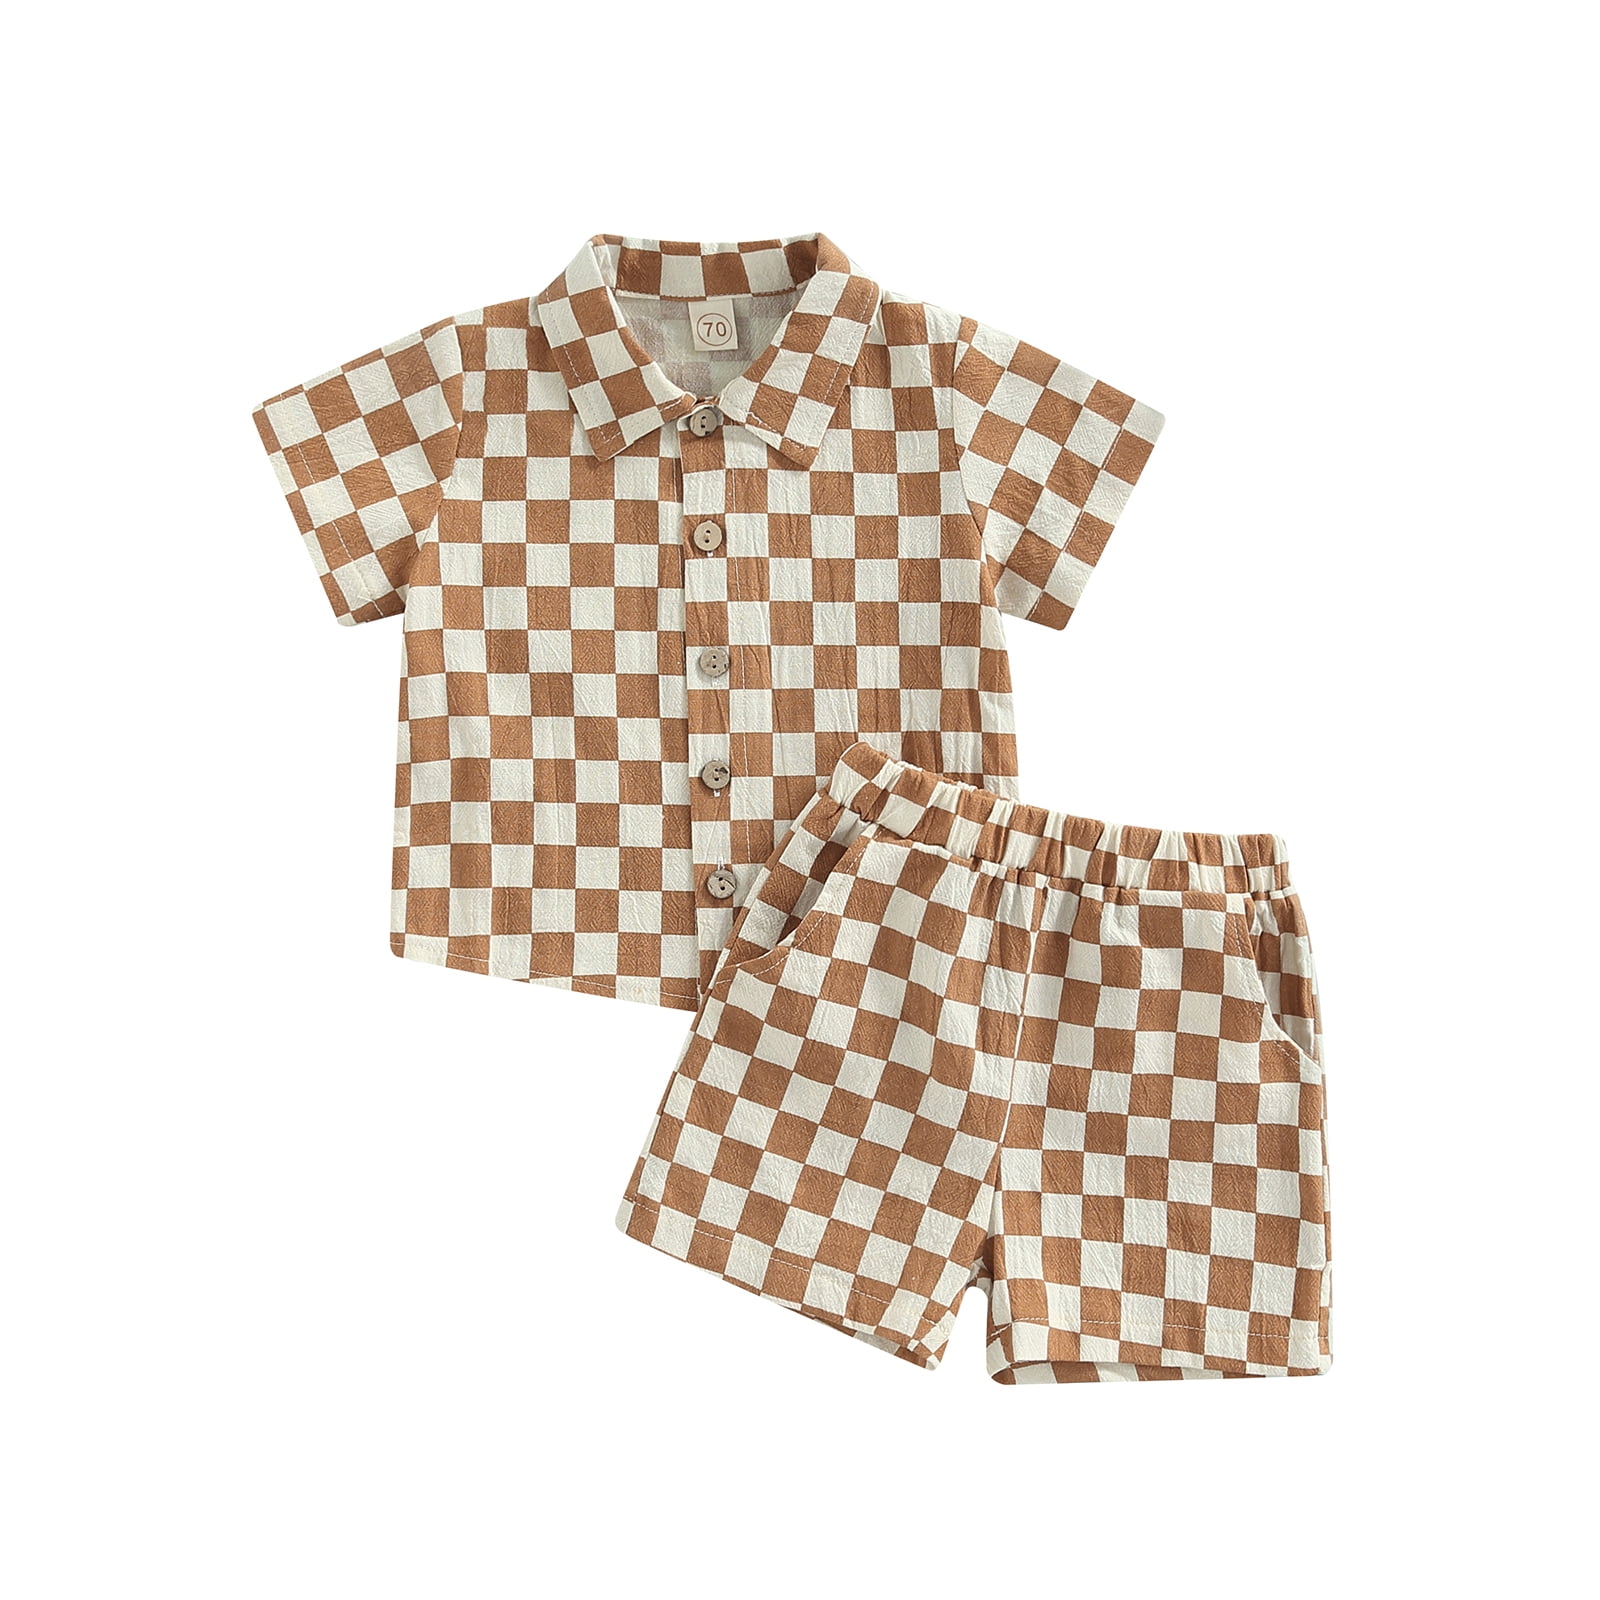 Multitrust Toddler Baby Boys Checkerboard Plaid Print Outfits